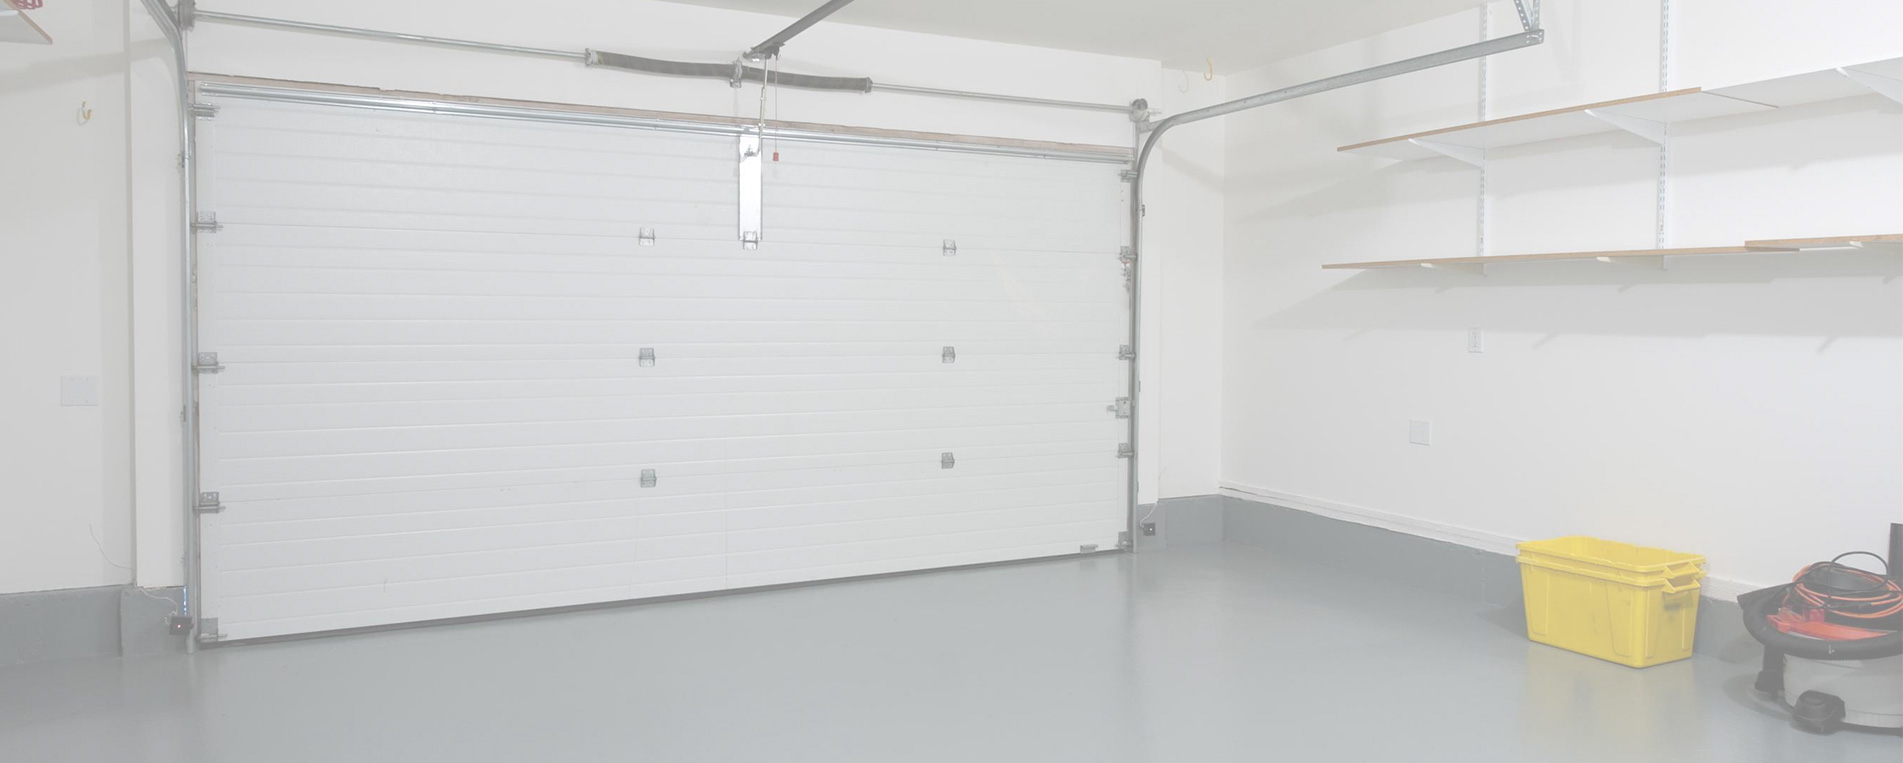 Cable Replacement For Garage Door In Charlotte